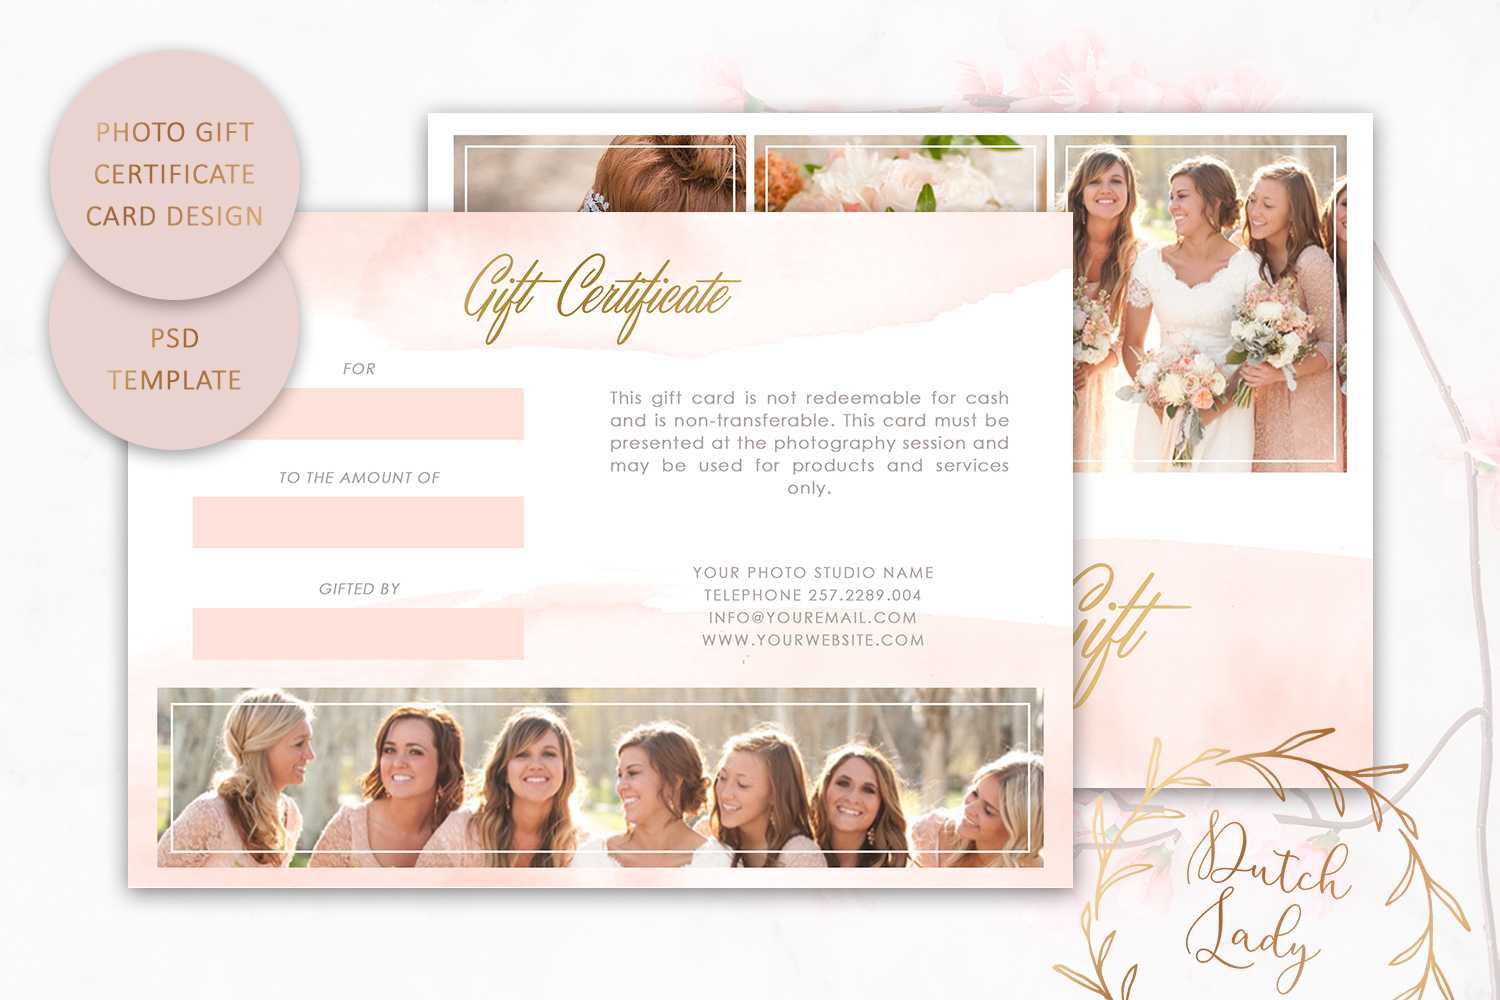 Psd Photography Gift Certificate Card Template 5 – Vsual With Regard To Photoshoot Gift Certificate Template